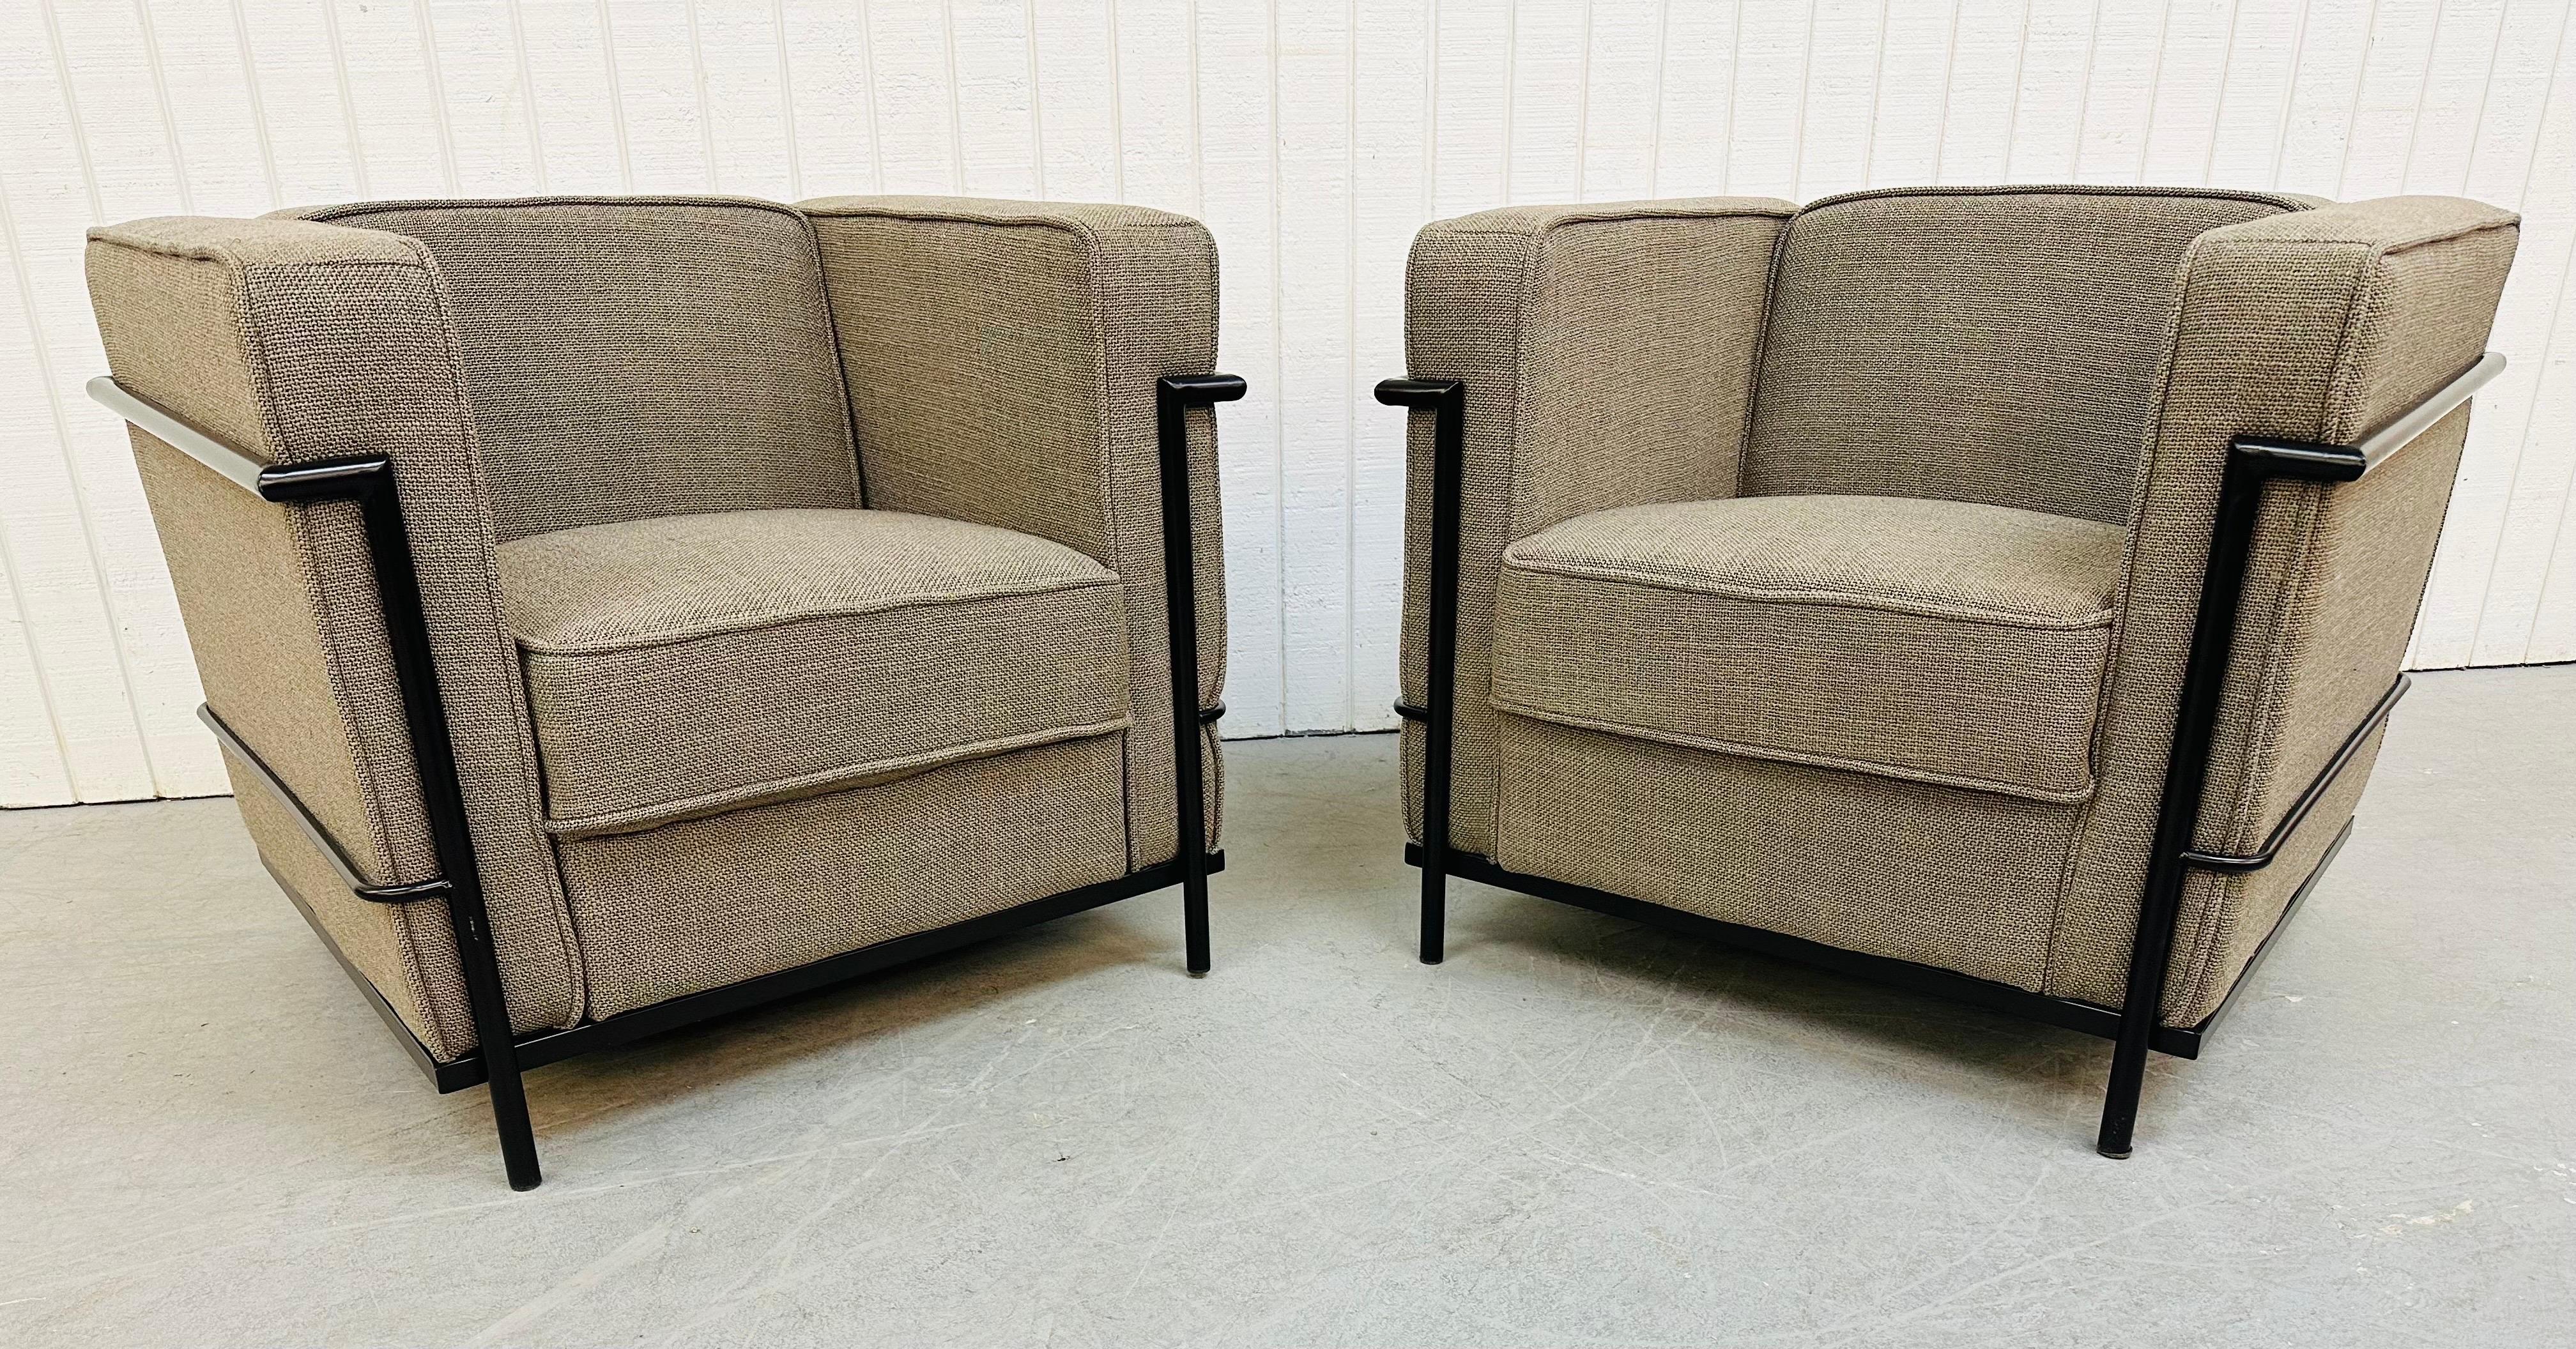 This listing is for a pair of Modern Le Corbusier style club chairs. This iconic reproduction of the LC2 chair features cushions that are upholstered in a gray fabric sitting in a black metal base. These chairs would be a wonderful addition to any